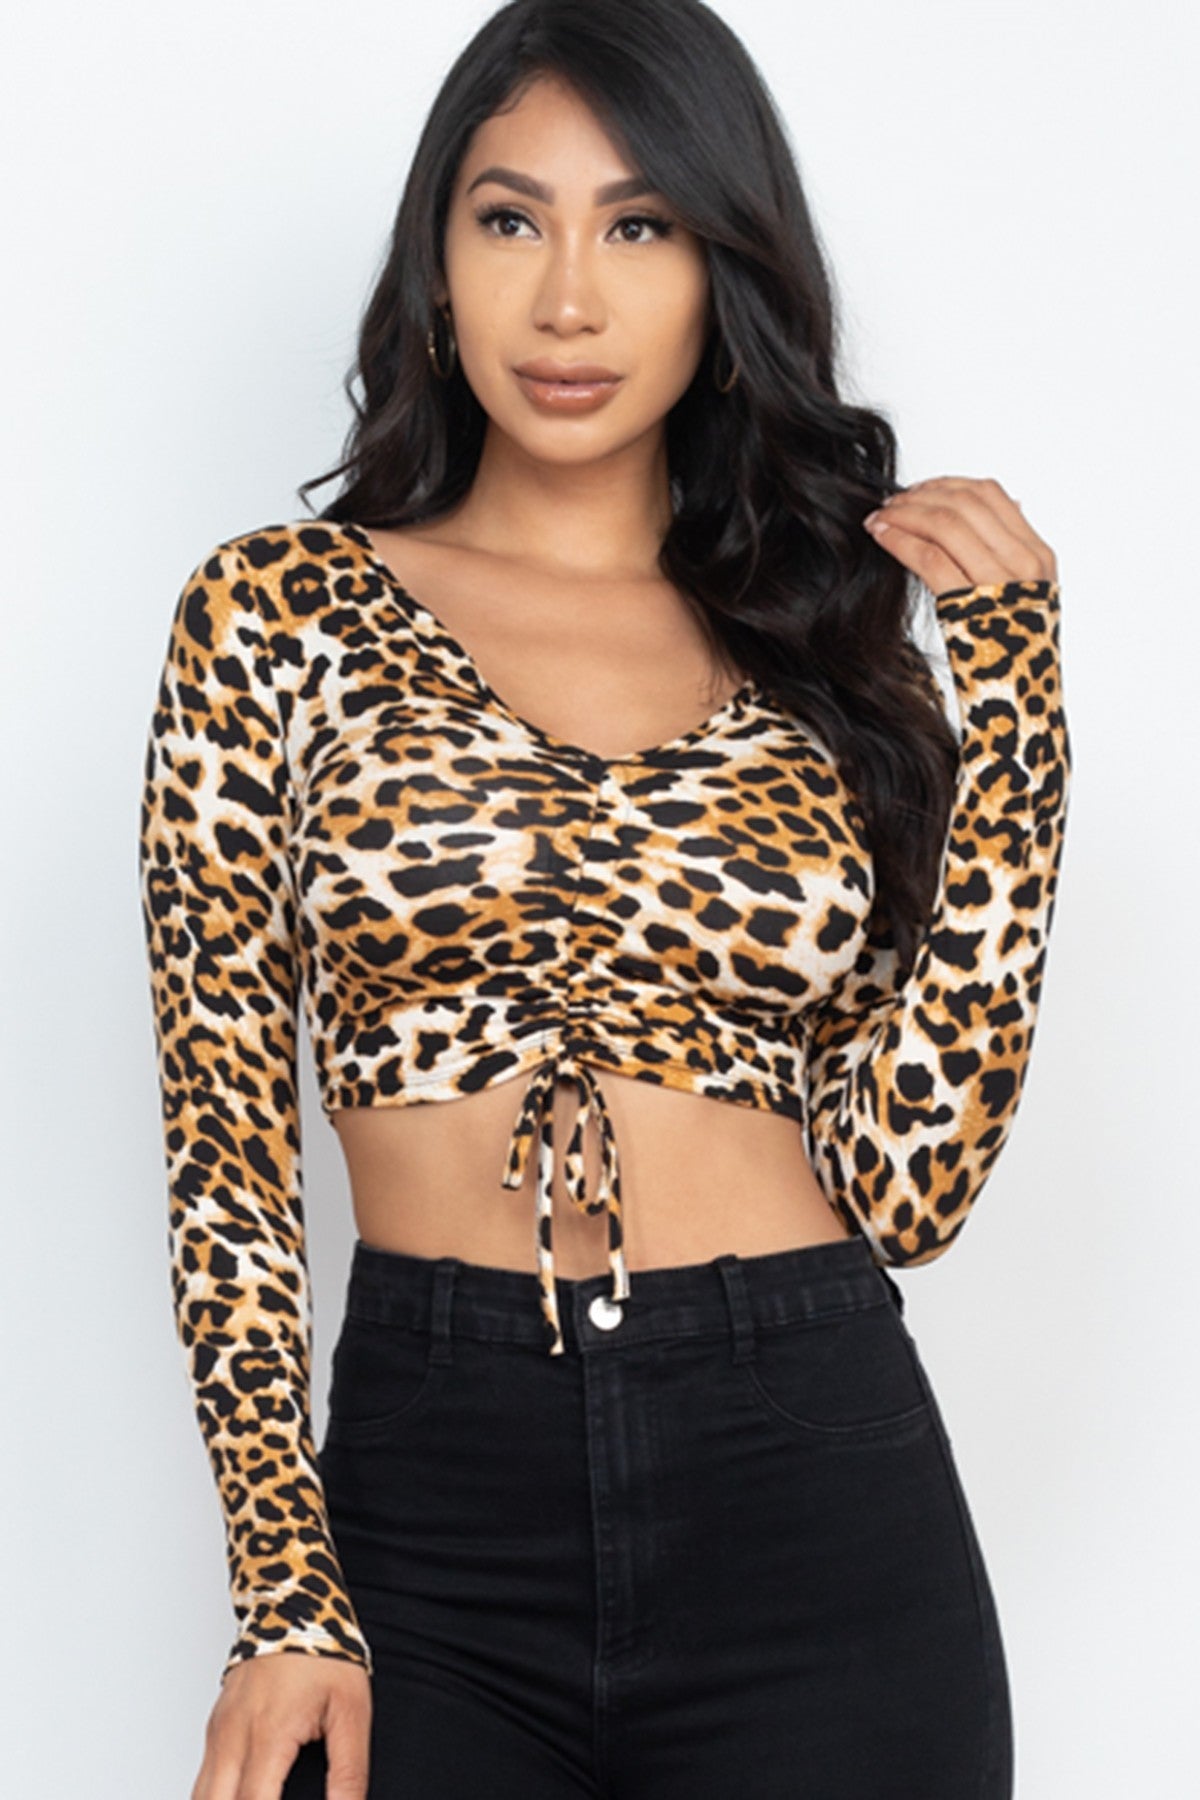 Leopard Print Strap Ruched Front Crop Top - Love It Clothing